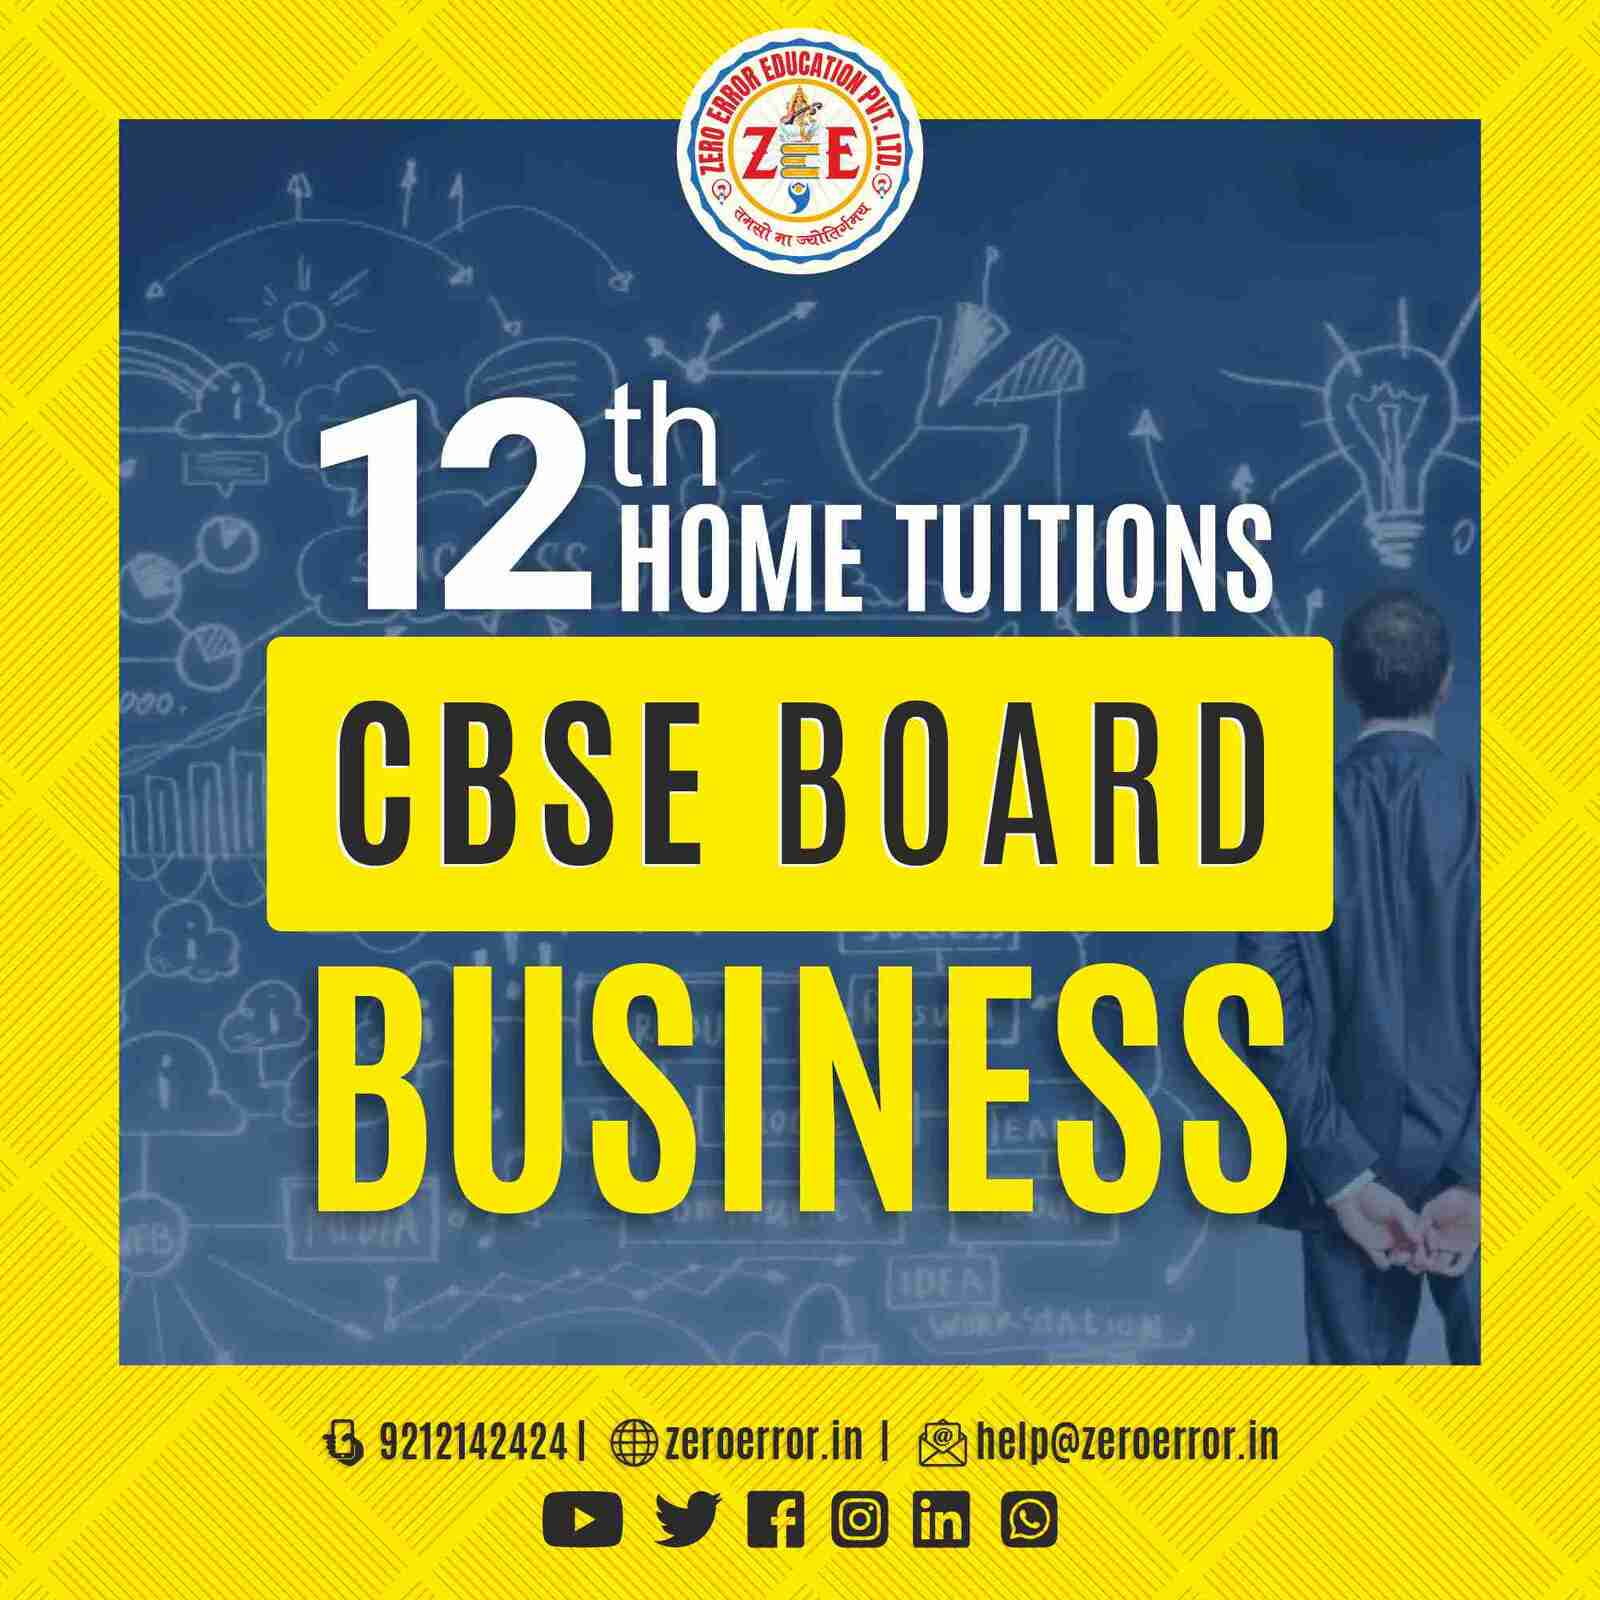 12th Grade CBSE Business Online Classes by Zero Error Education Prepare for your CBSE board exams with online and offline Business classes for 12th grade. Learn from experienced home tutors and get all the help you need to succeed. Enroll today at Zero Error Education. [https://zeroerror.in/] Call 9212142424 for more information.